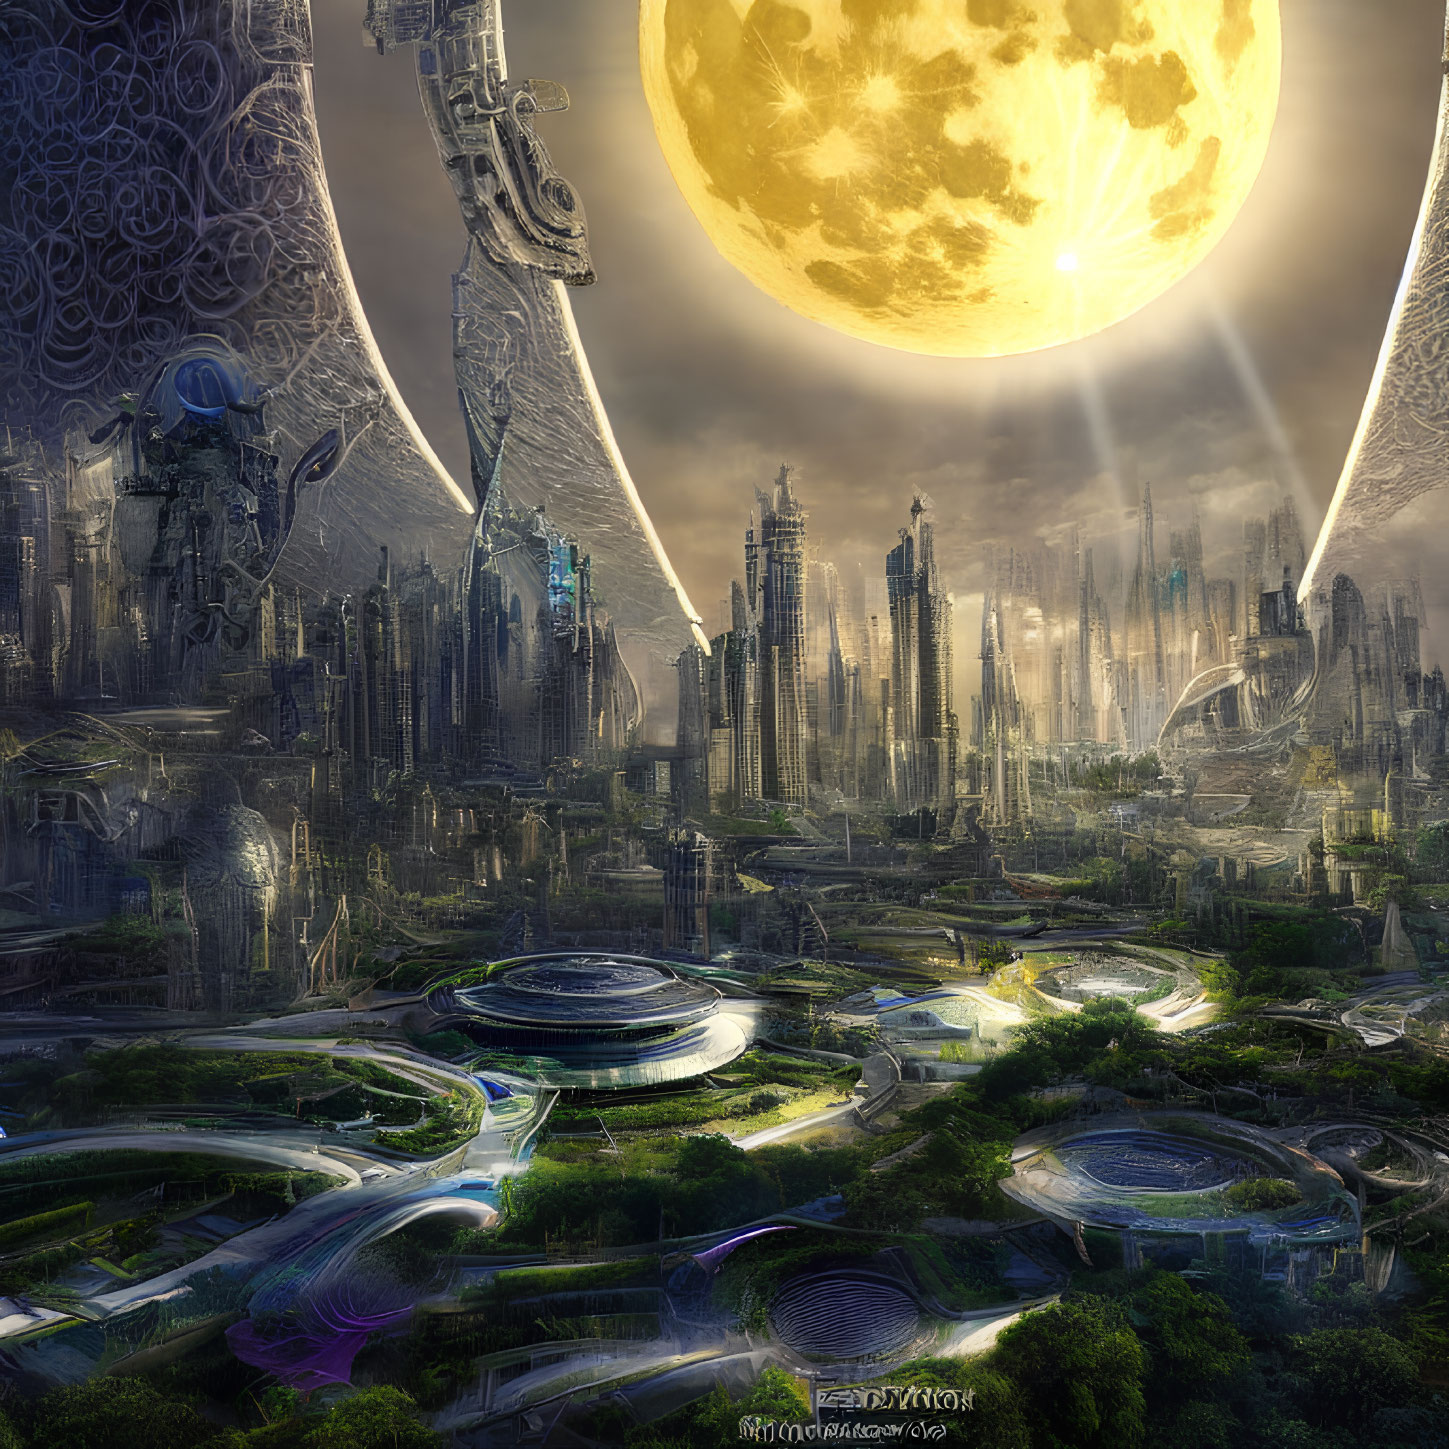 Futuristic cityscape with skyscrapers, moon, and light beams